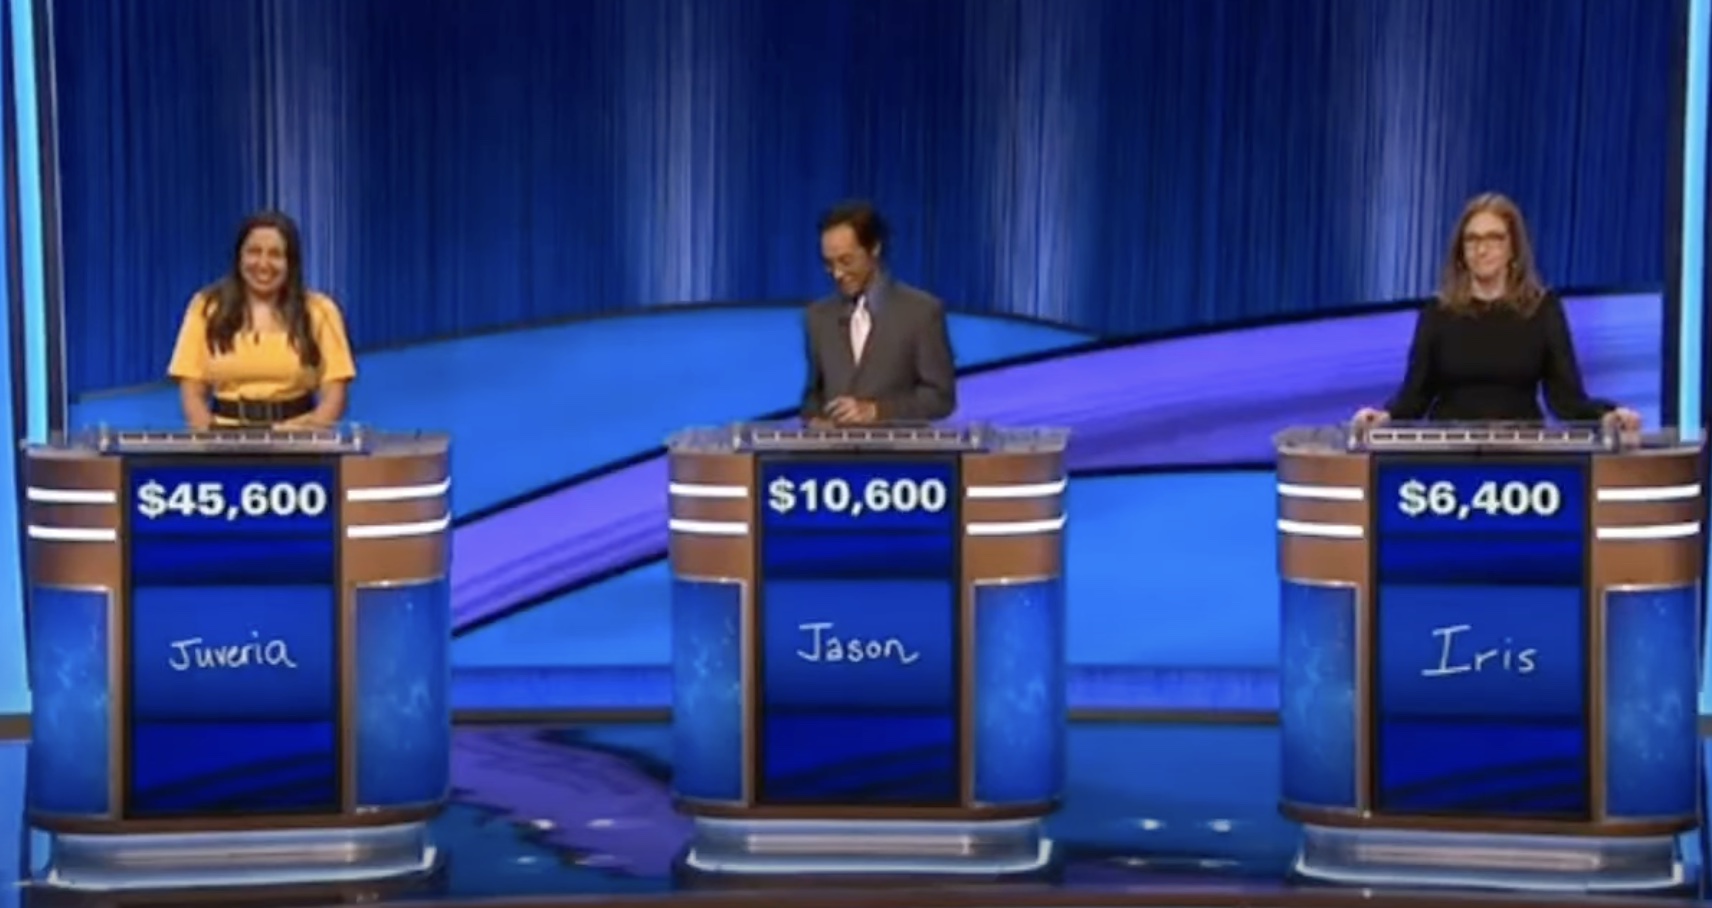 Ken Jennings couldn't help but remark: 'Jason, Iris, not so bad until you look at Juveria’s score!'